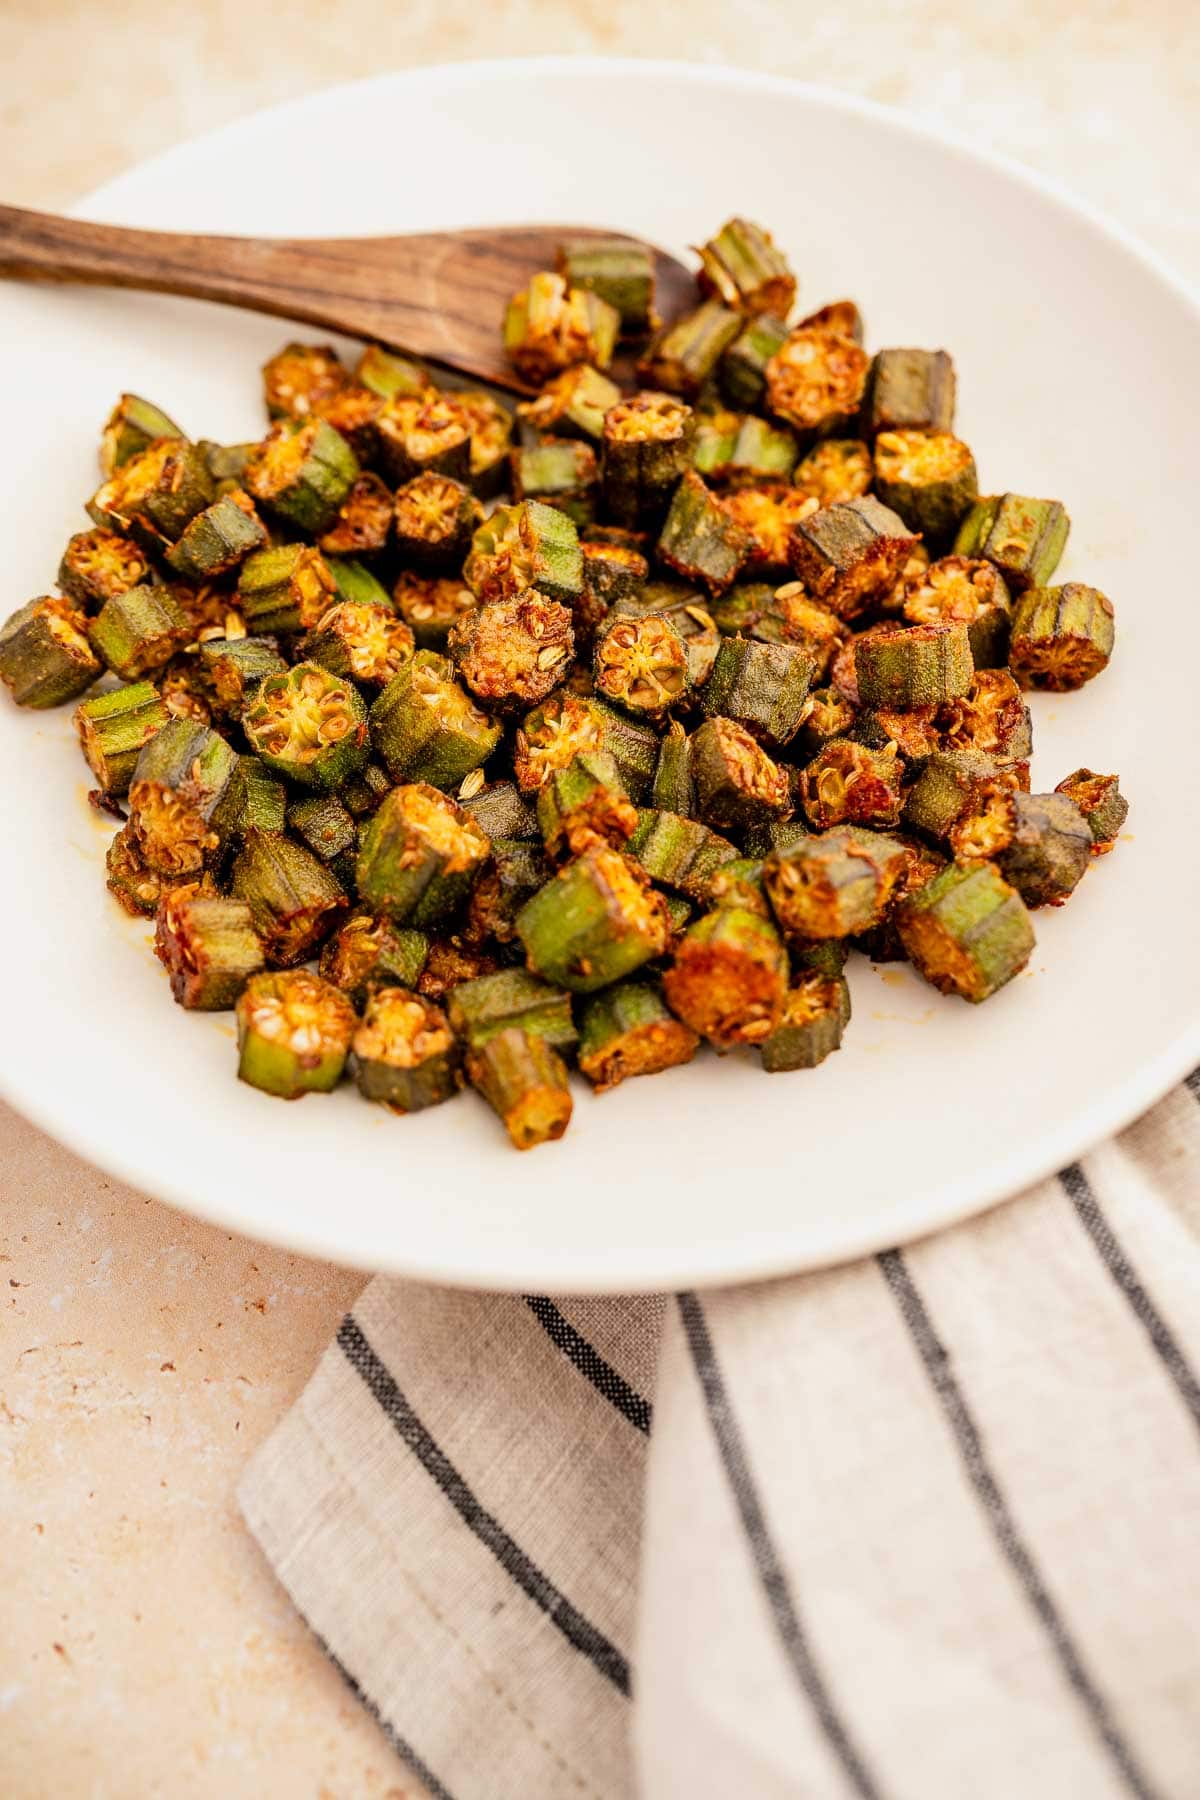 A plate of roasted okra recipe on a kitchen countertop.